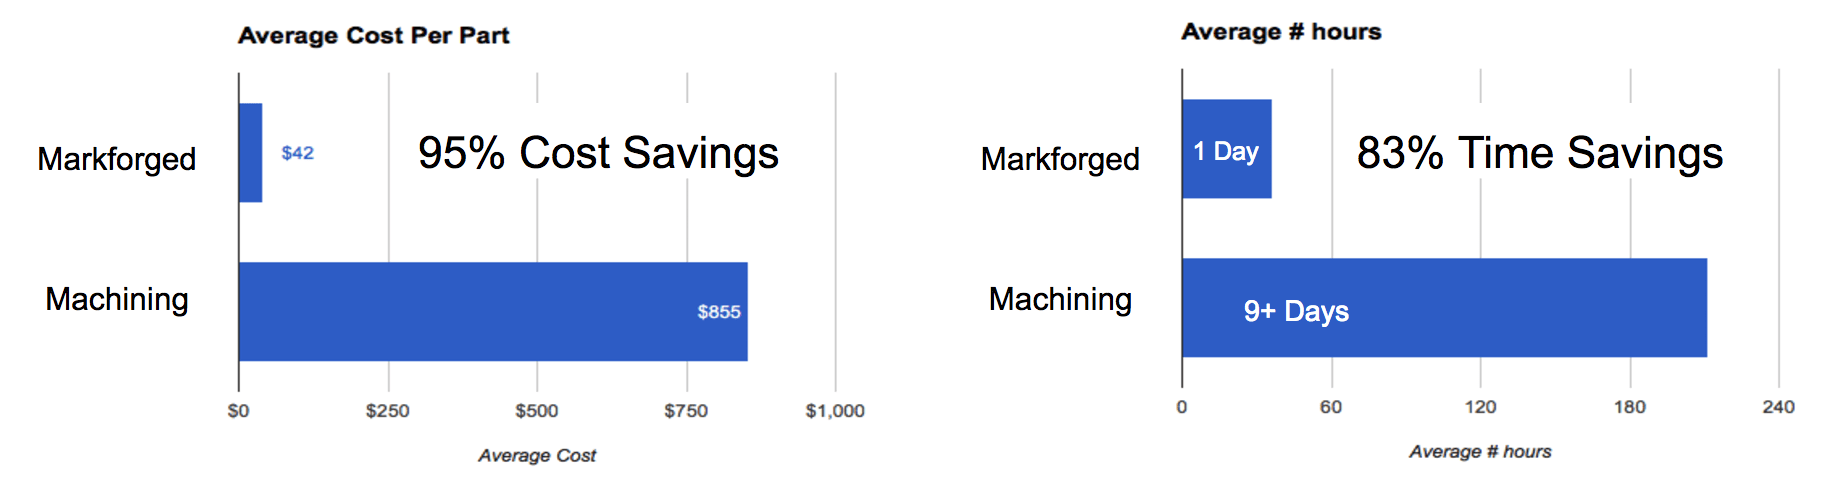 Average cost and time savings accumulate by Markforged customers.